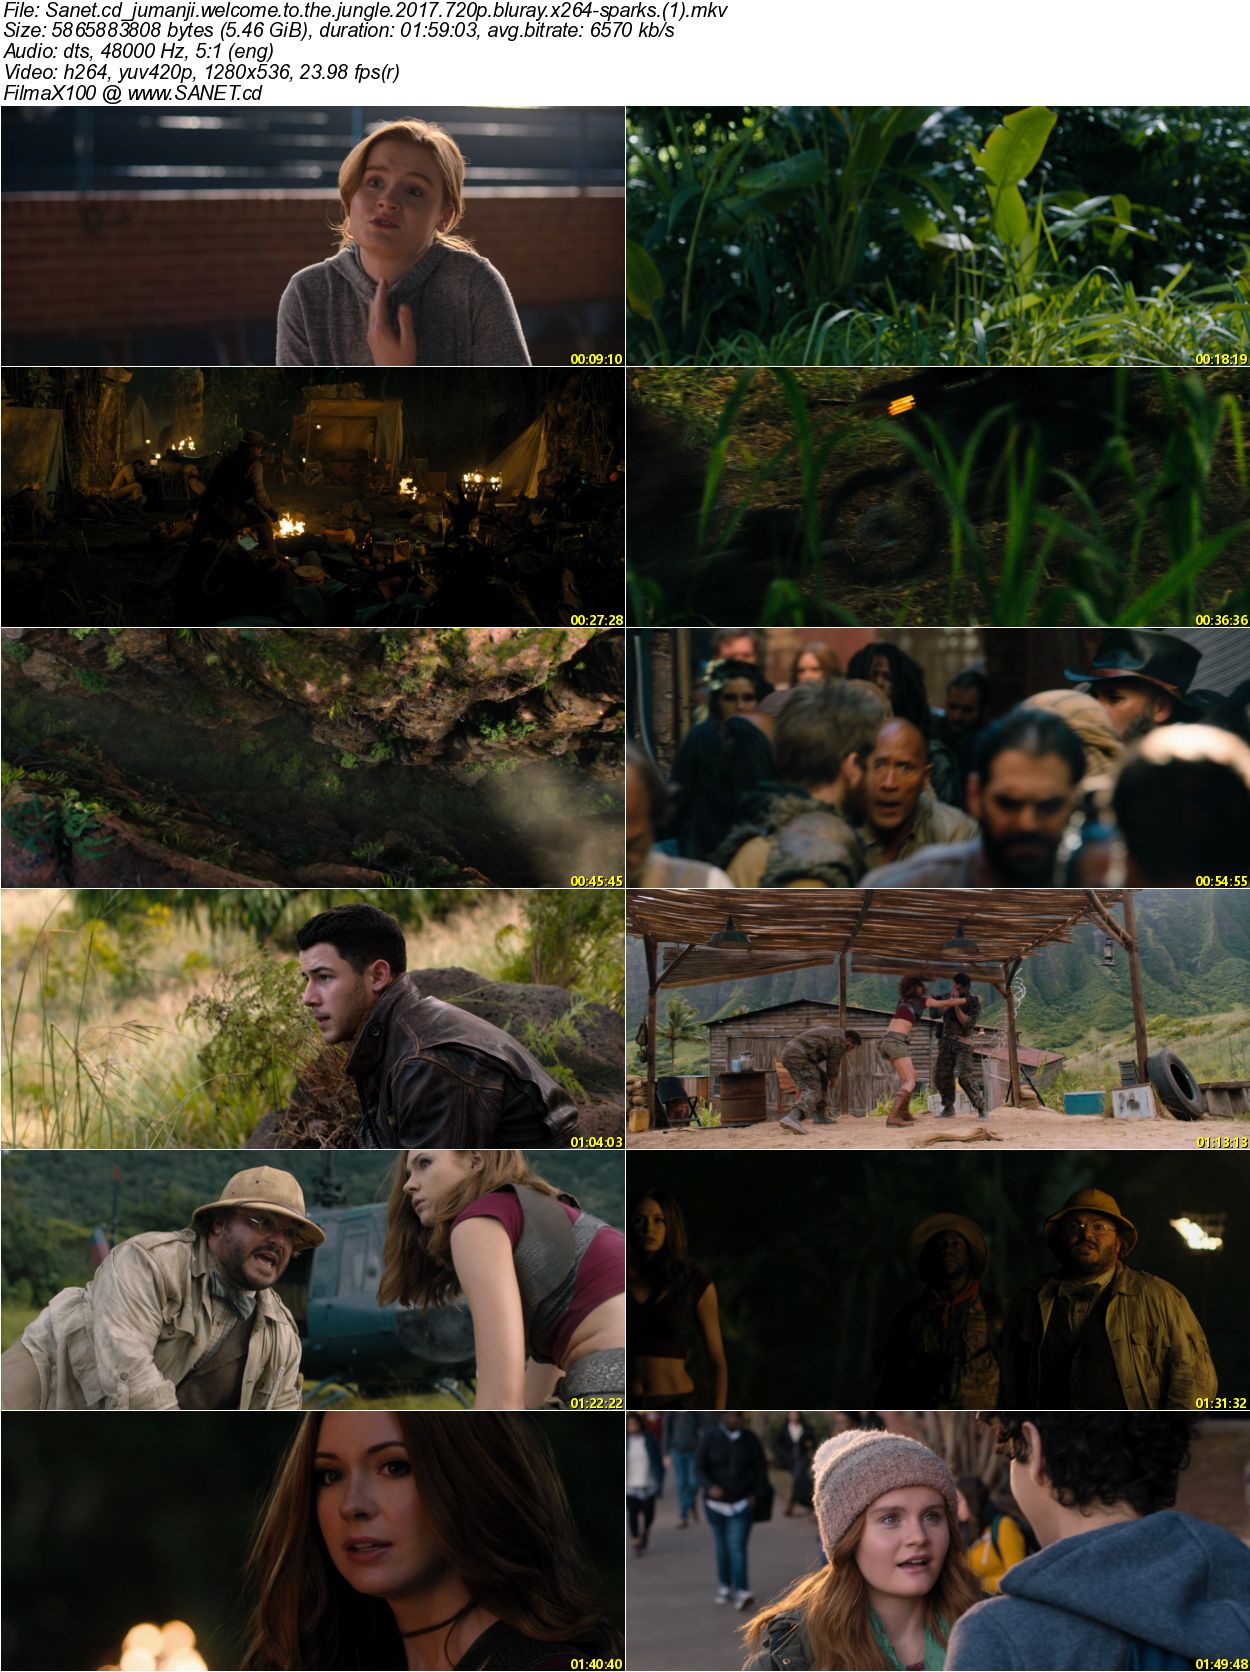 download the new version for apple Jumanji: Welcome to the Jungle